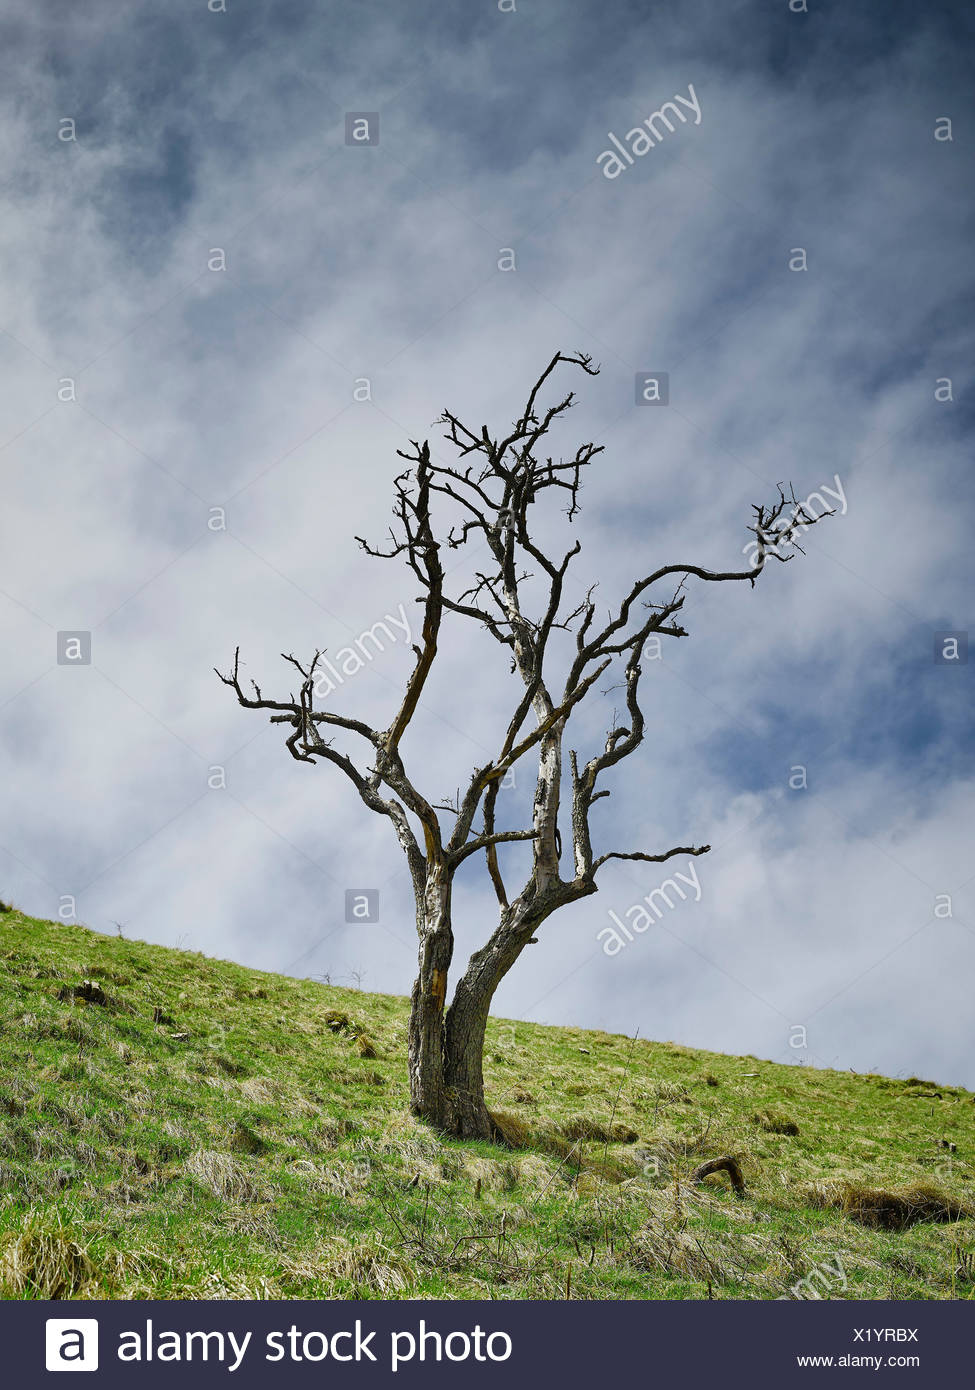 Tree With No Leaves Stock Photos & Tree With No Leaves Stock Images - Alamy